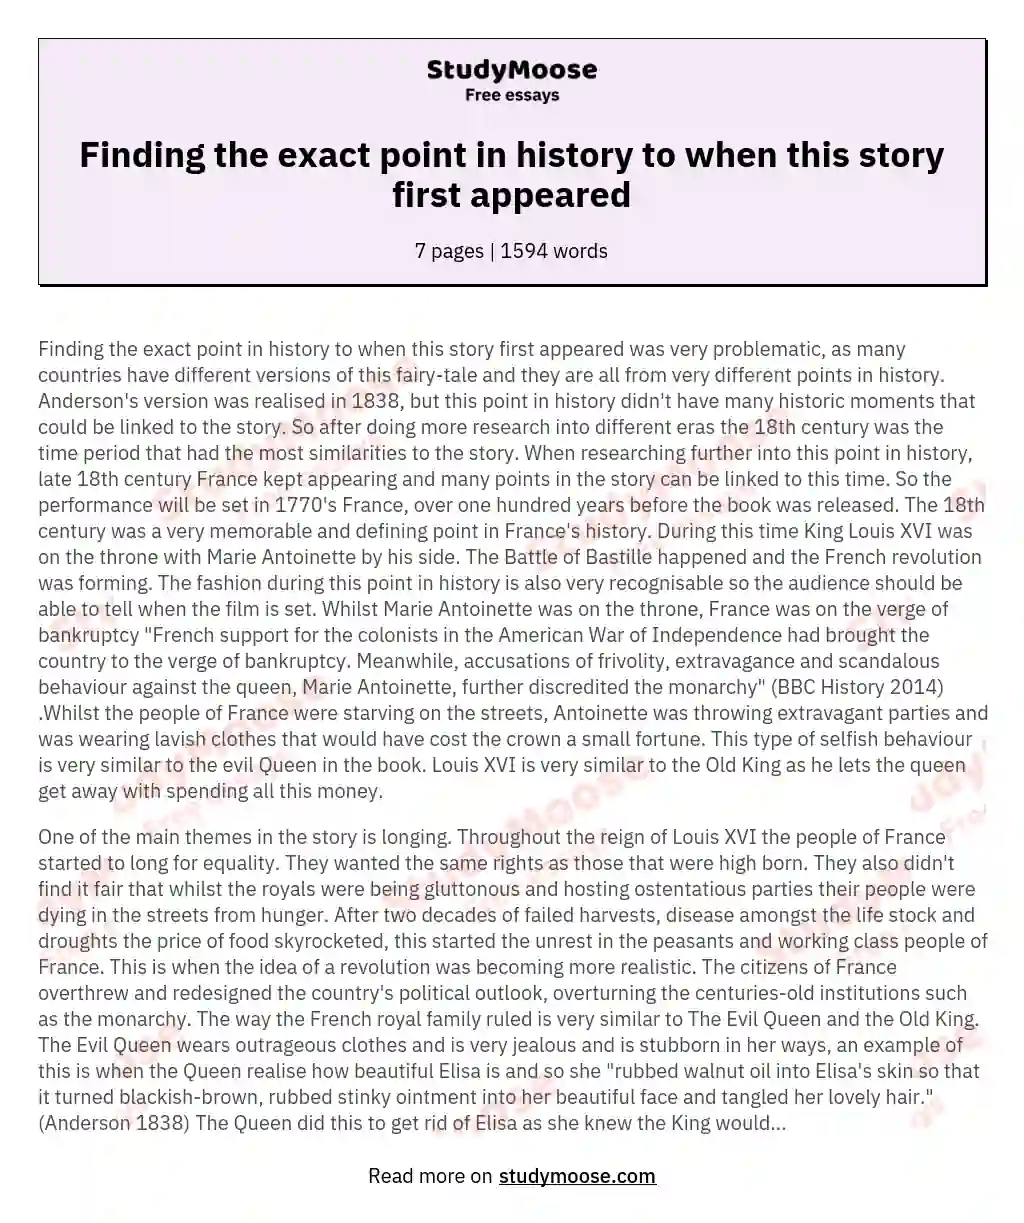 Finding the exact point in history to when this story first appeared essay